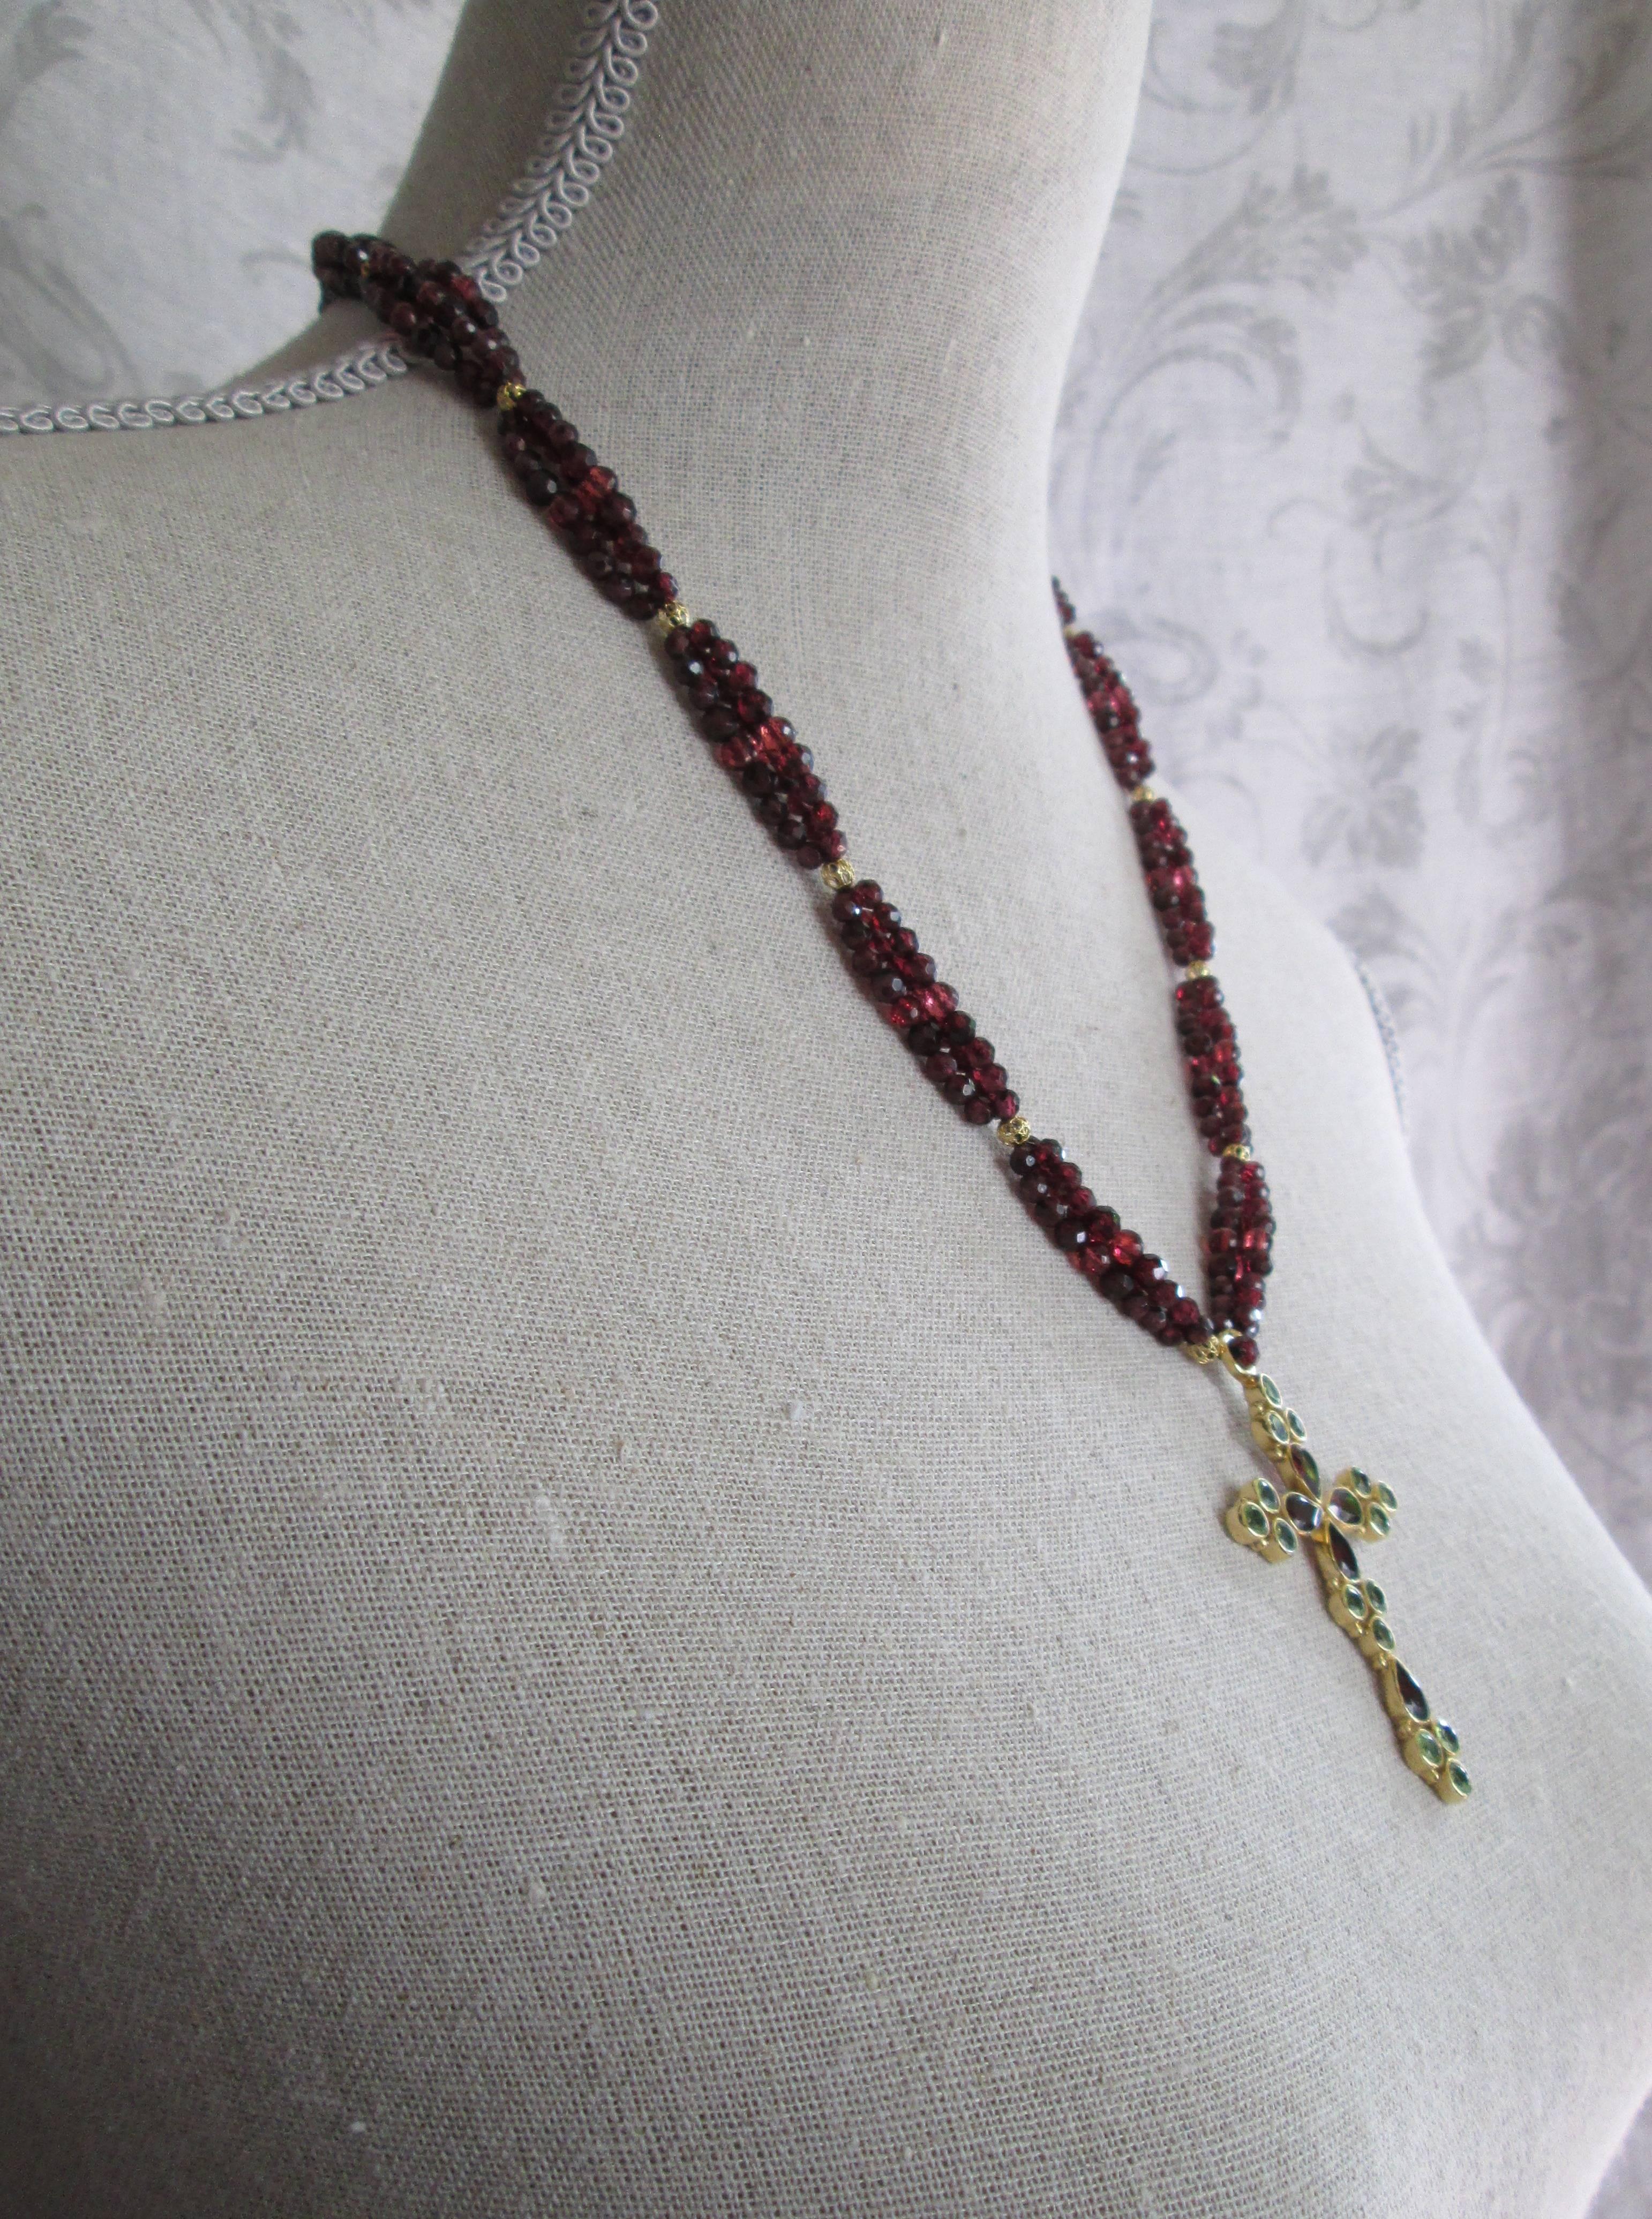 Women's Faceted Garnet Bead Necklace with Peridot and Garnet Gold-Plated Silver Cross